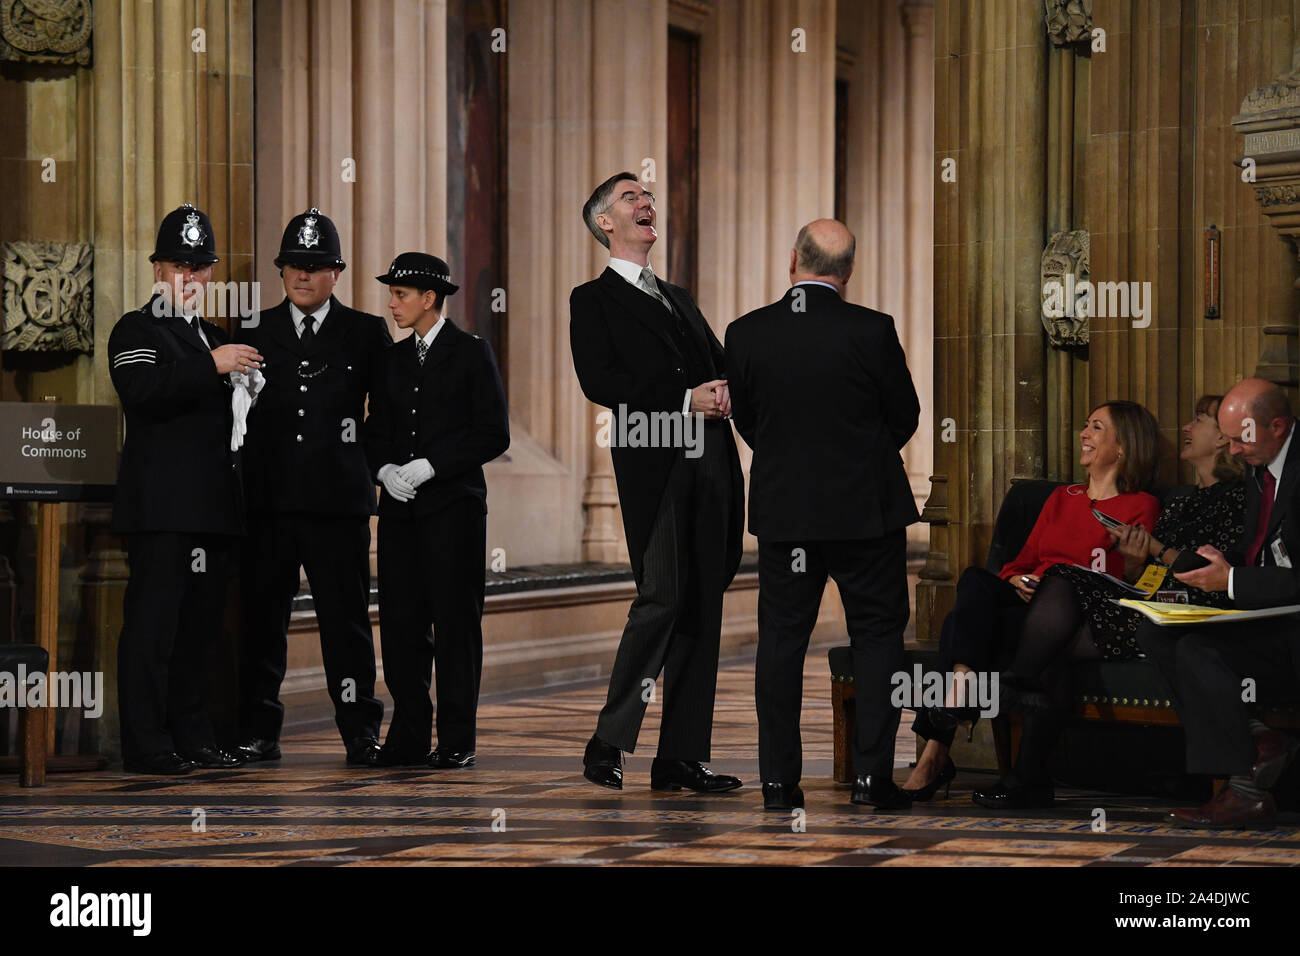 Leader of the House of Commons Jacob Rees-Mogg (centre) in the Central Lobby after members of parliament were summoned to listen to the Queen's Speech during the State Opening of Parliament ceremony in London. Stock Photo